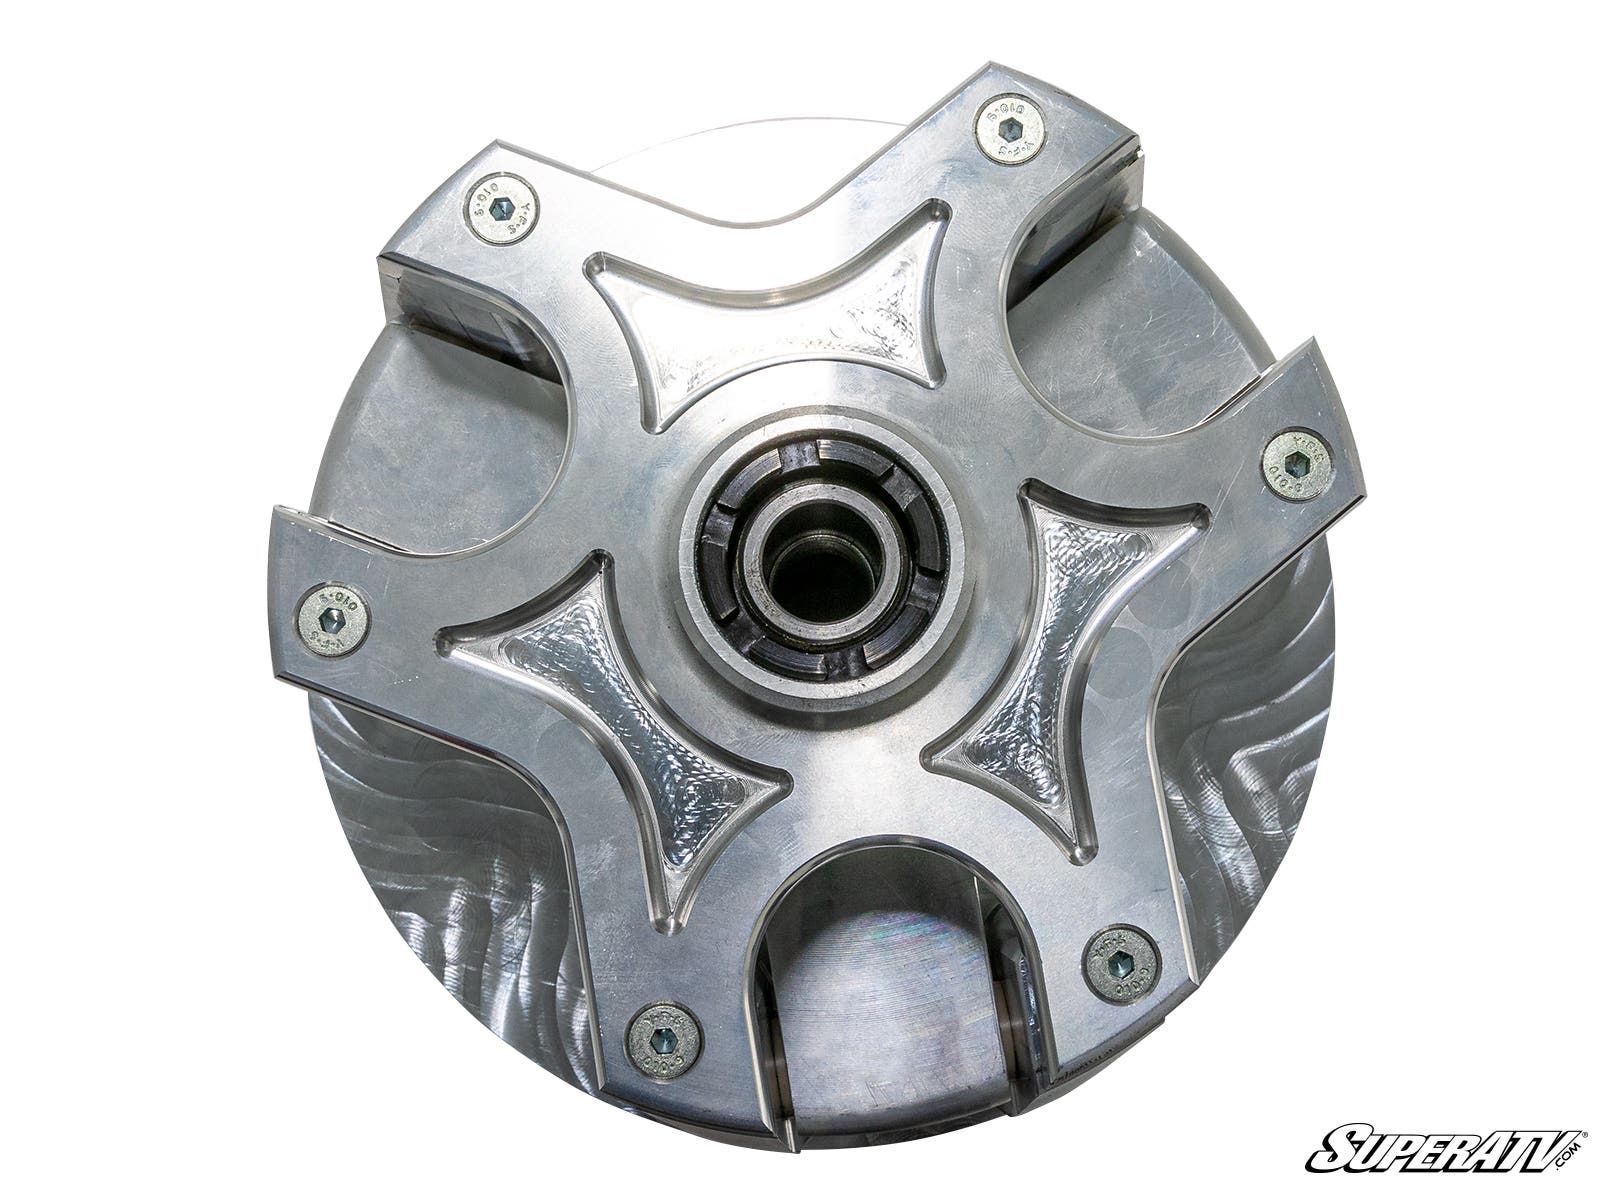 Polaris General XP 1000 Primary Clutch Assembly